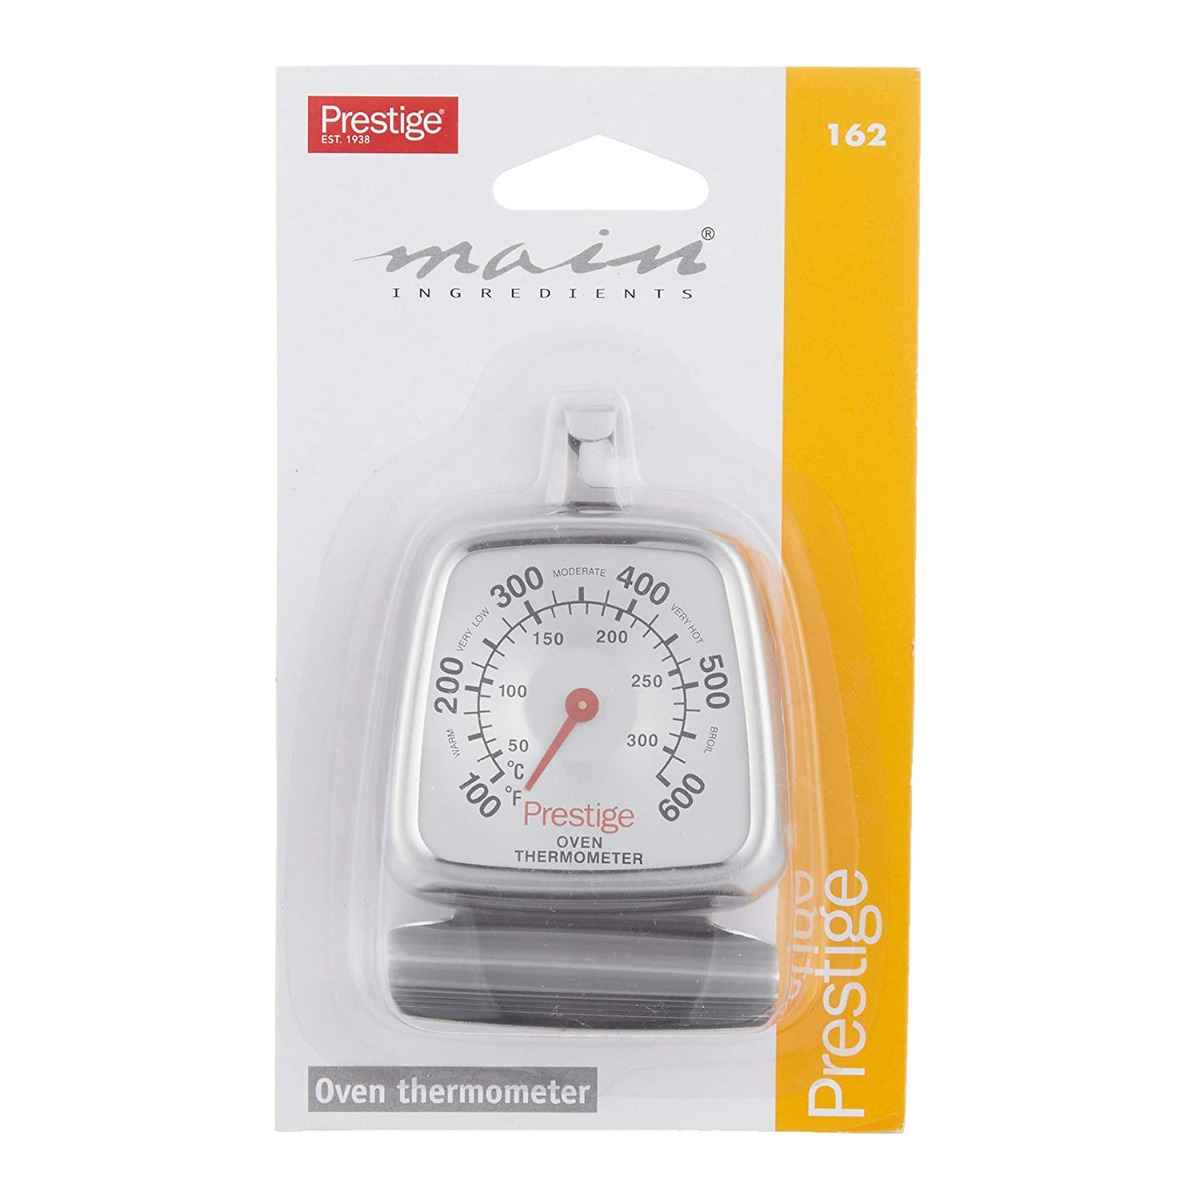 Prestige Oven Thermometer, Pr162, Silver, Stainless Steel